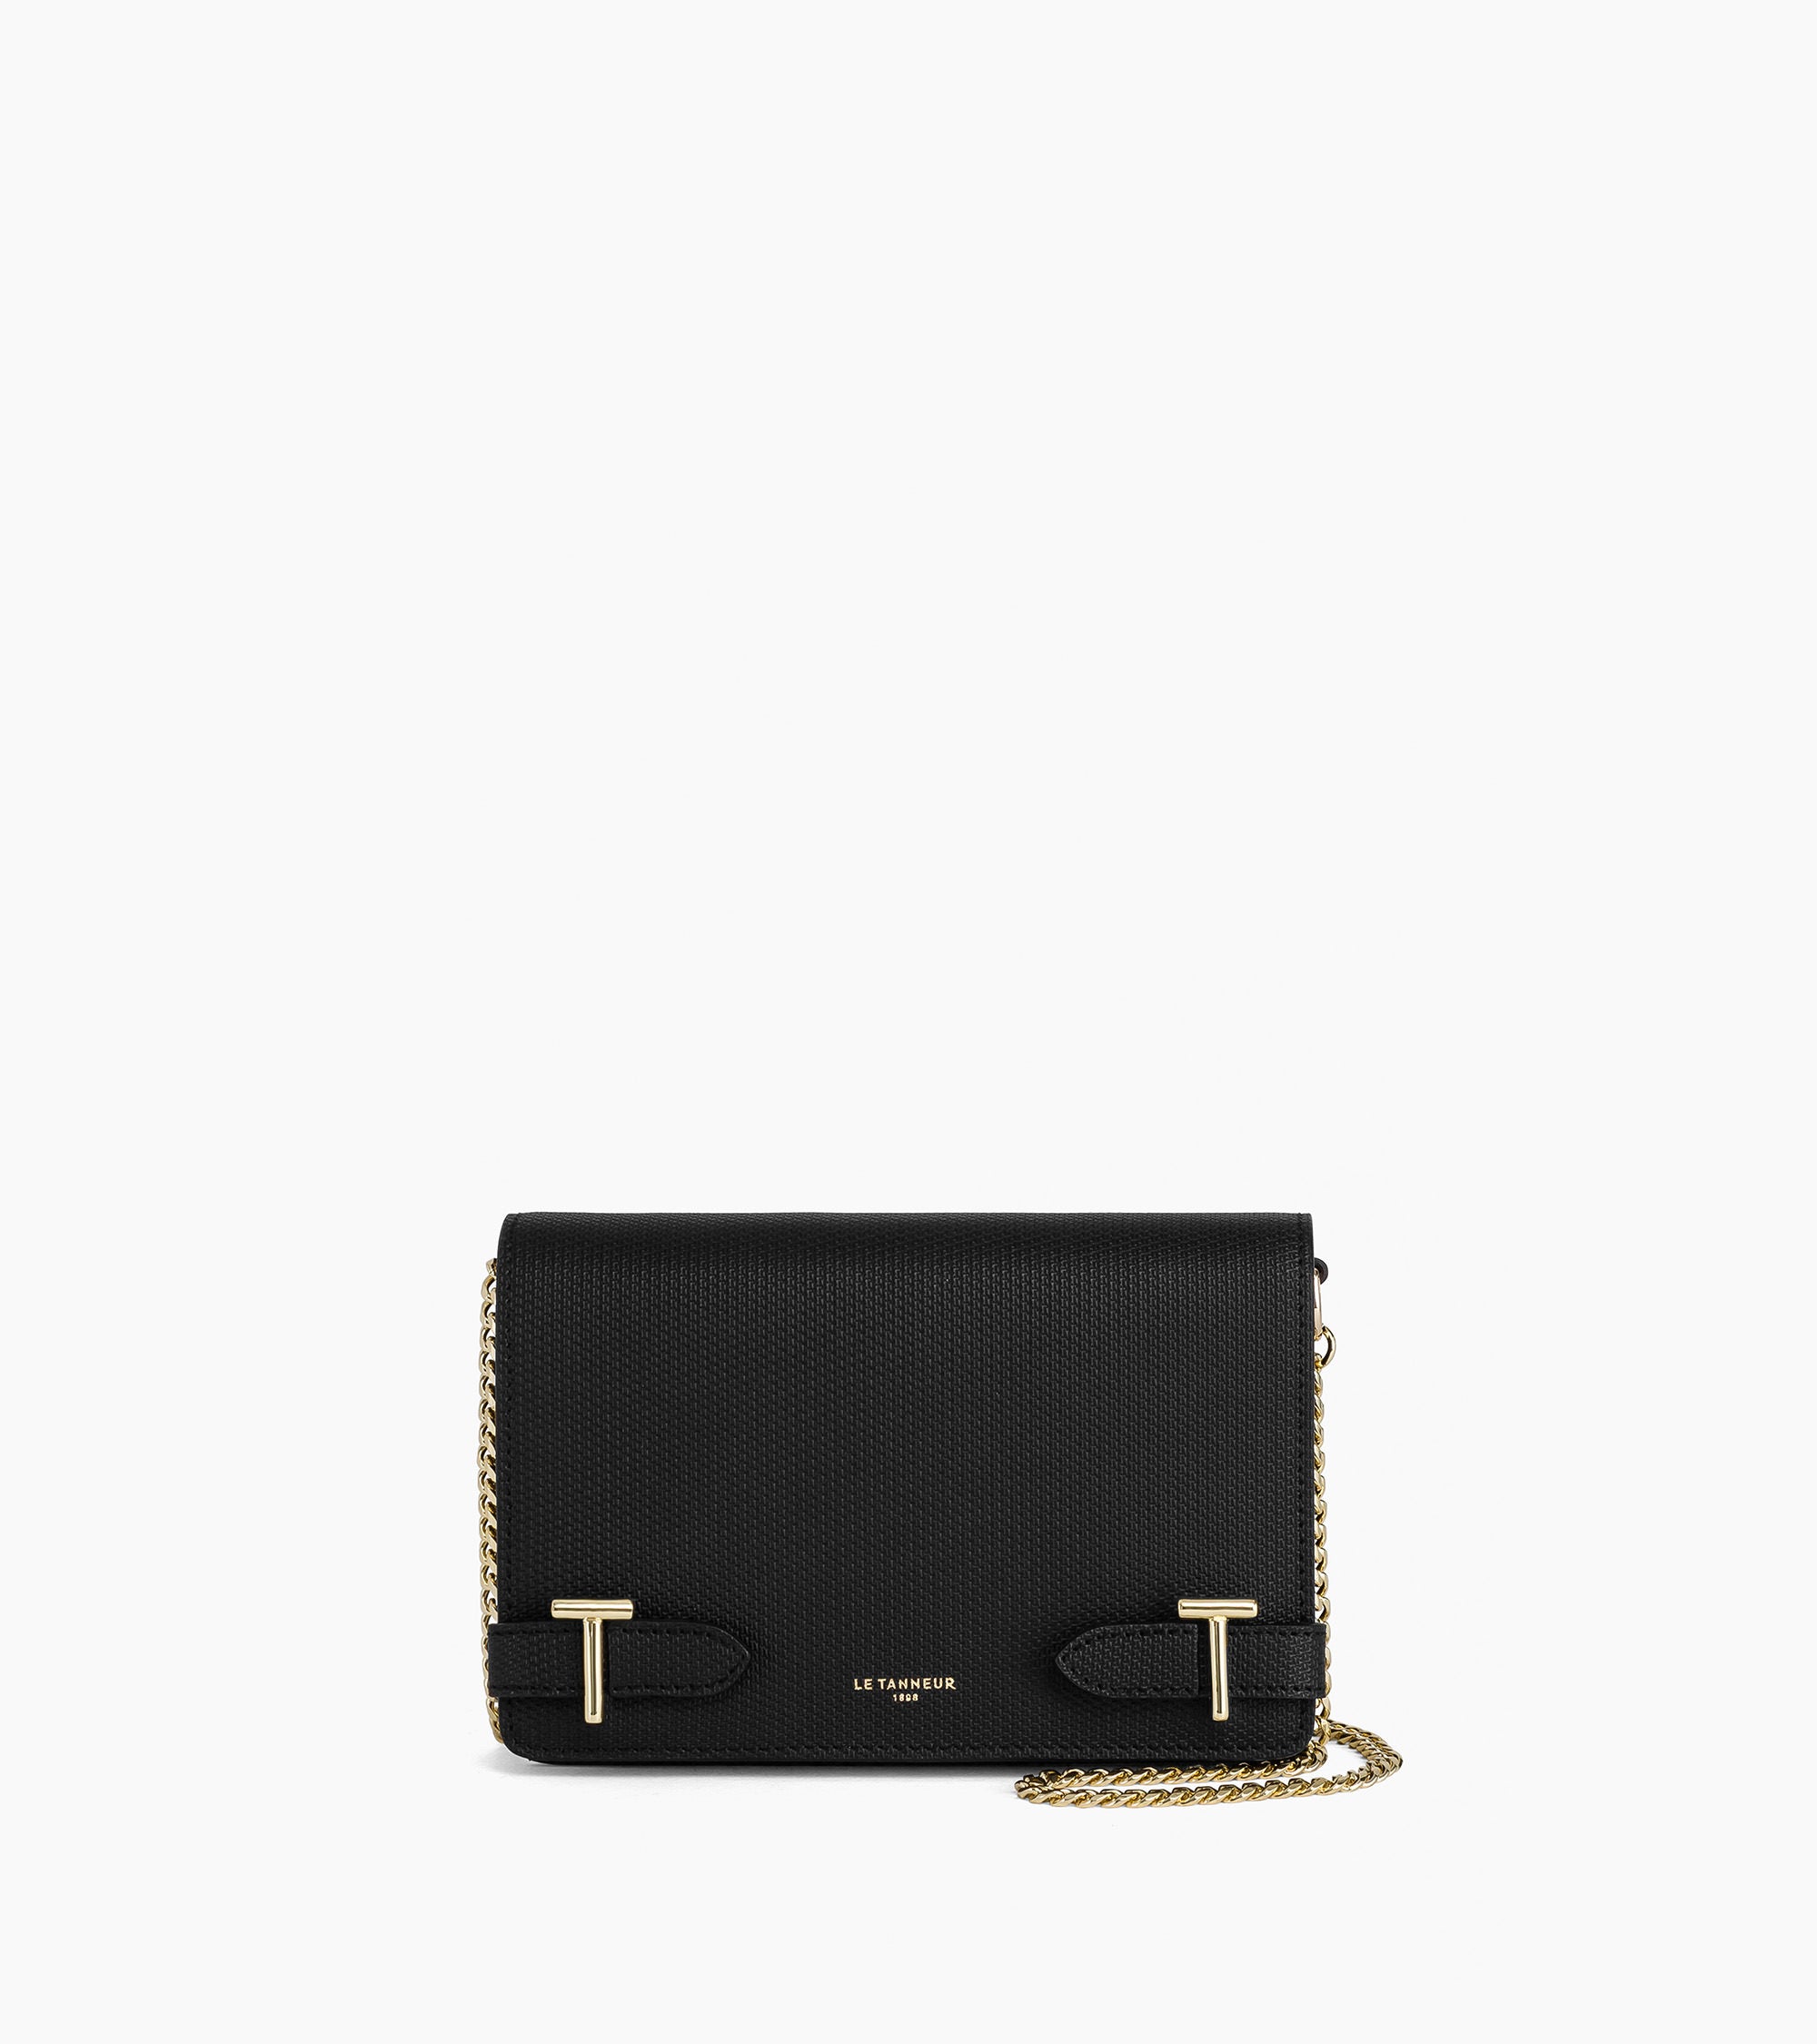 Emilie small bag with crossbody strap in signature T leather